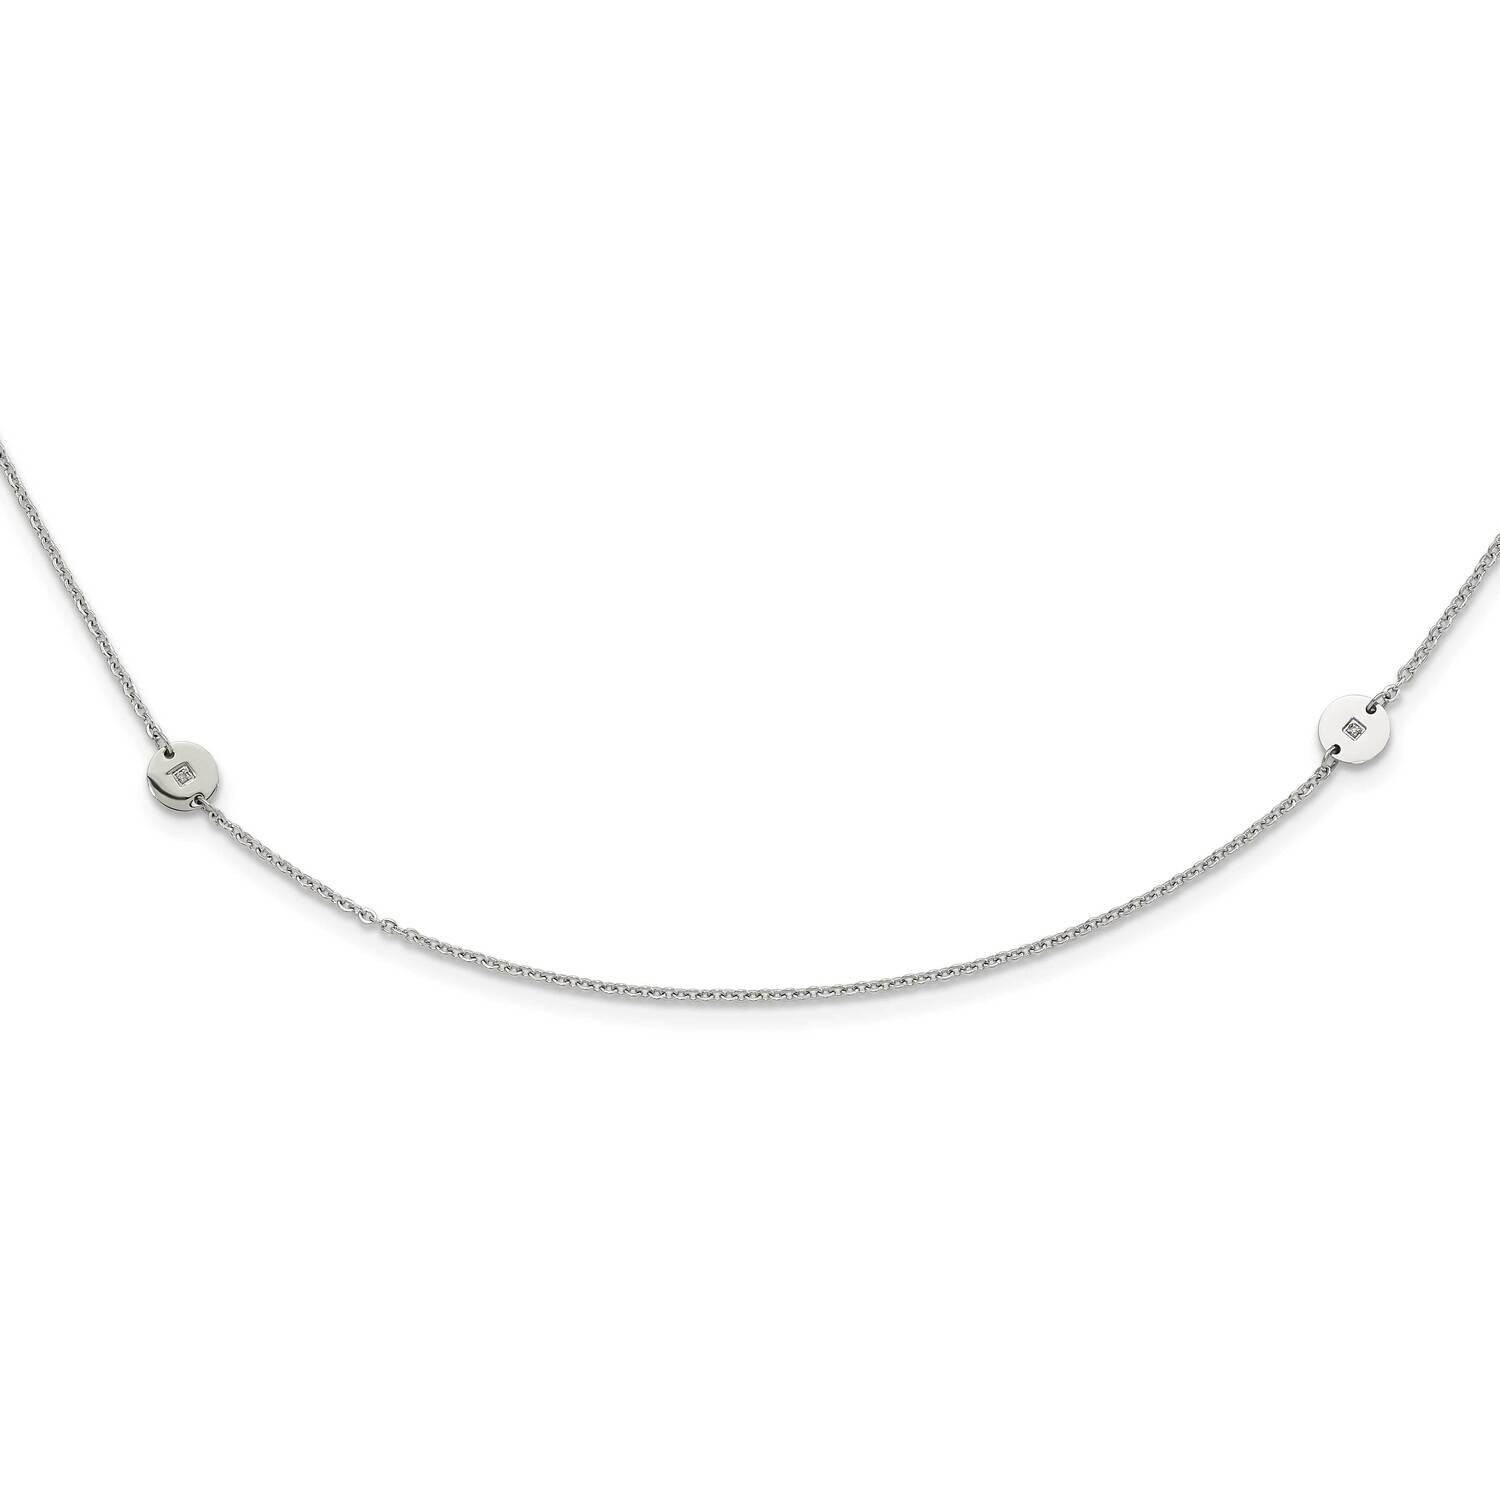 Polished Circles CZ Necklace Stainless Steel SRN1674-33.75